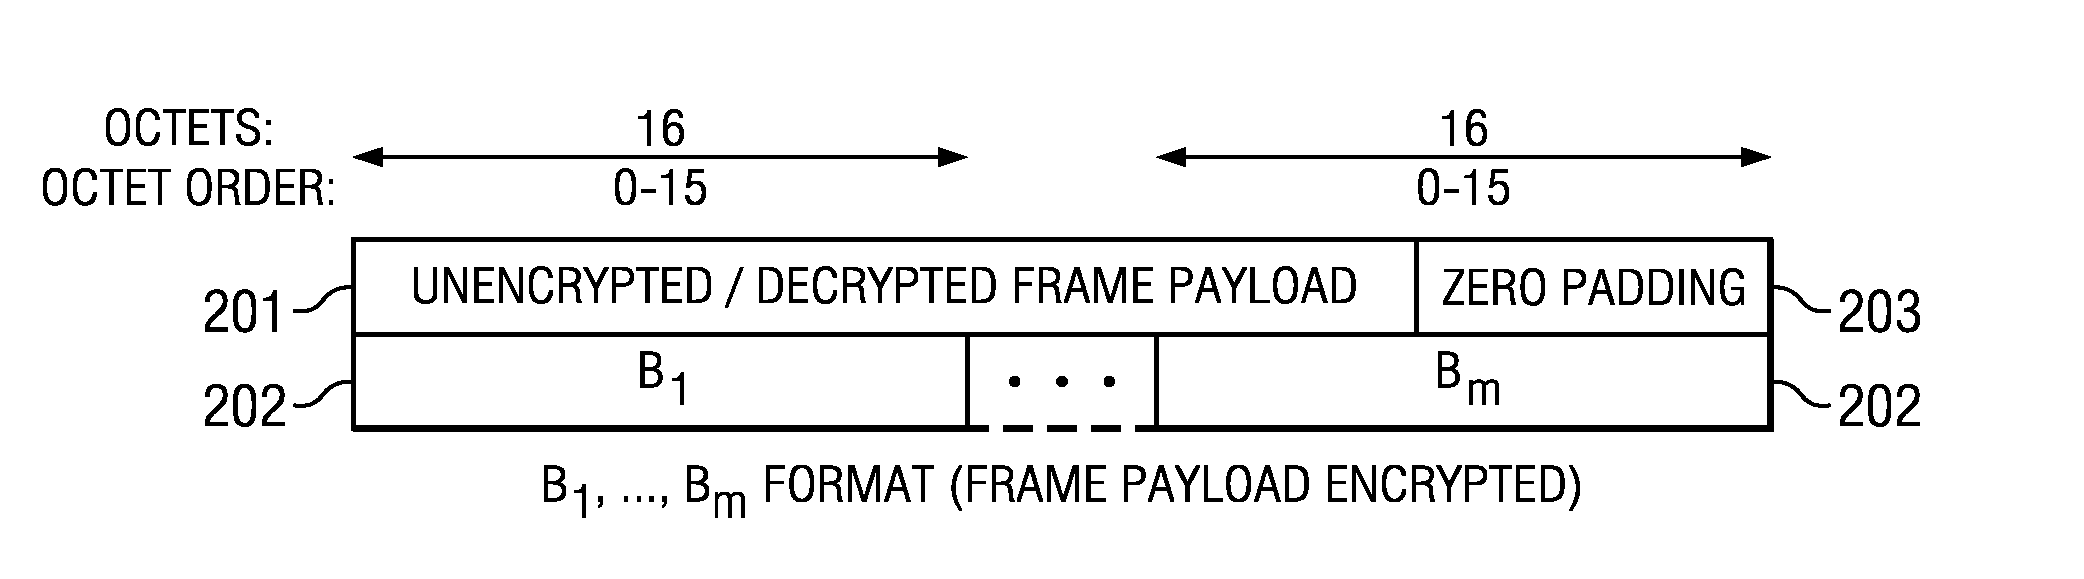 Authentication and Encryption for Secure Data Transmission